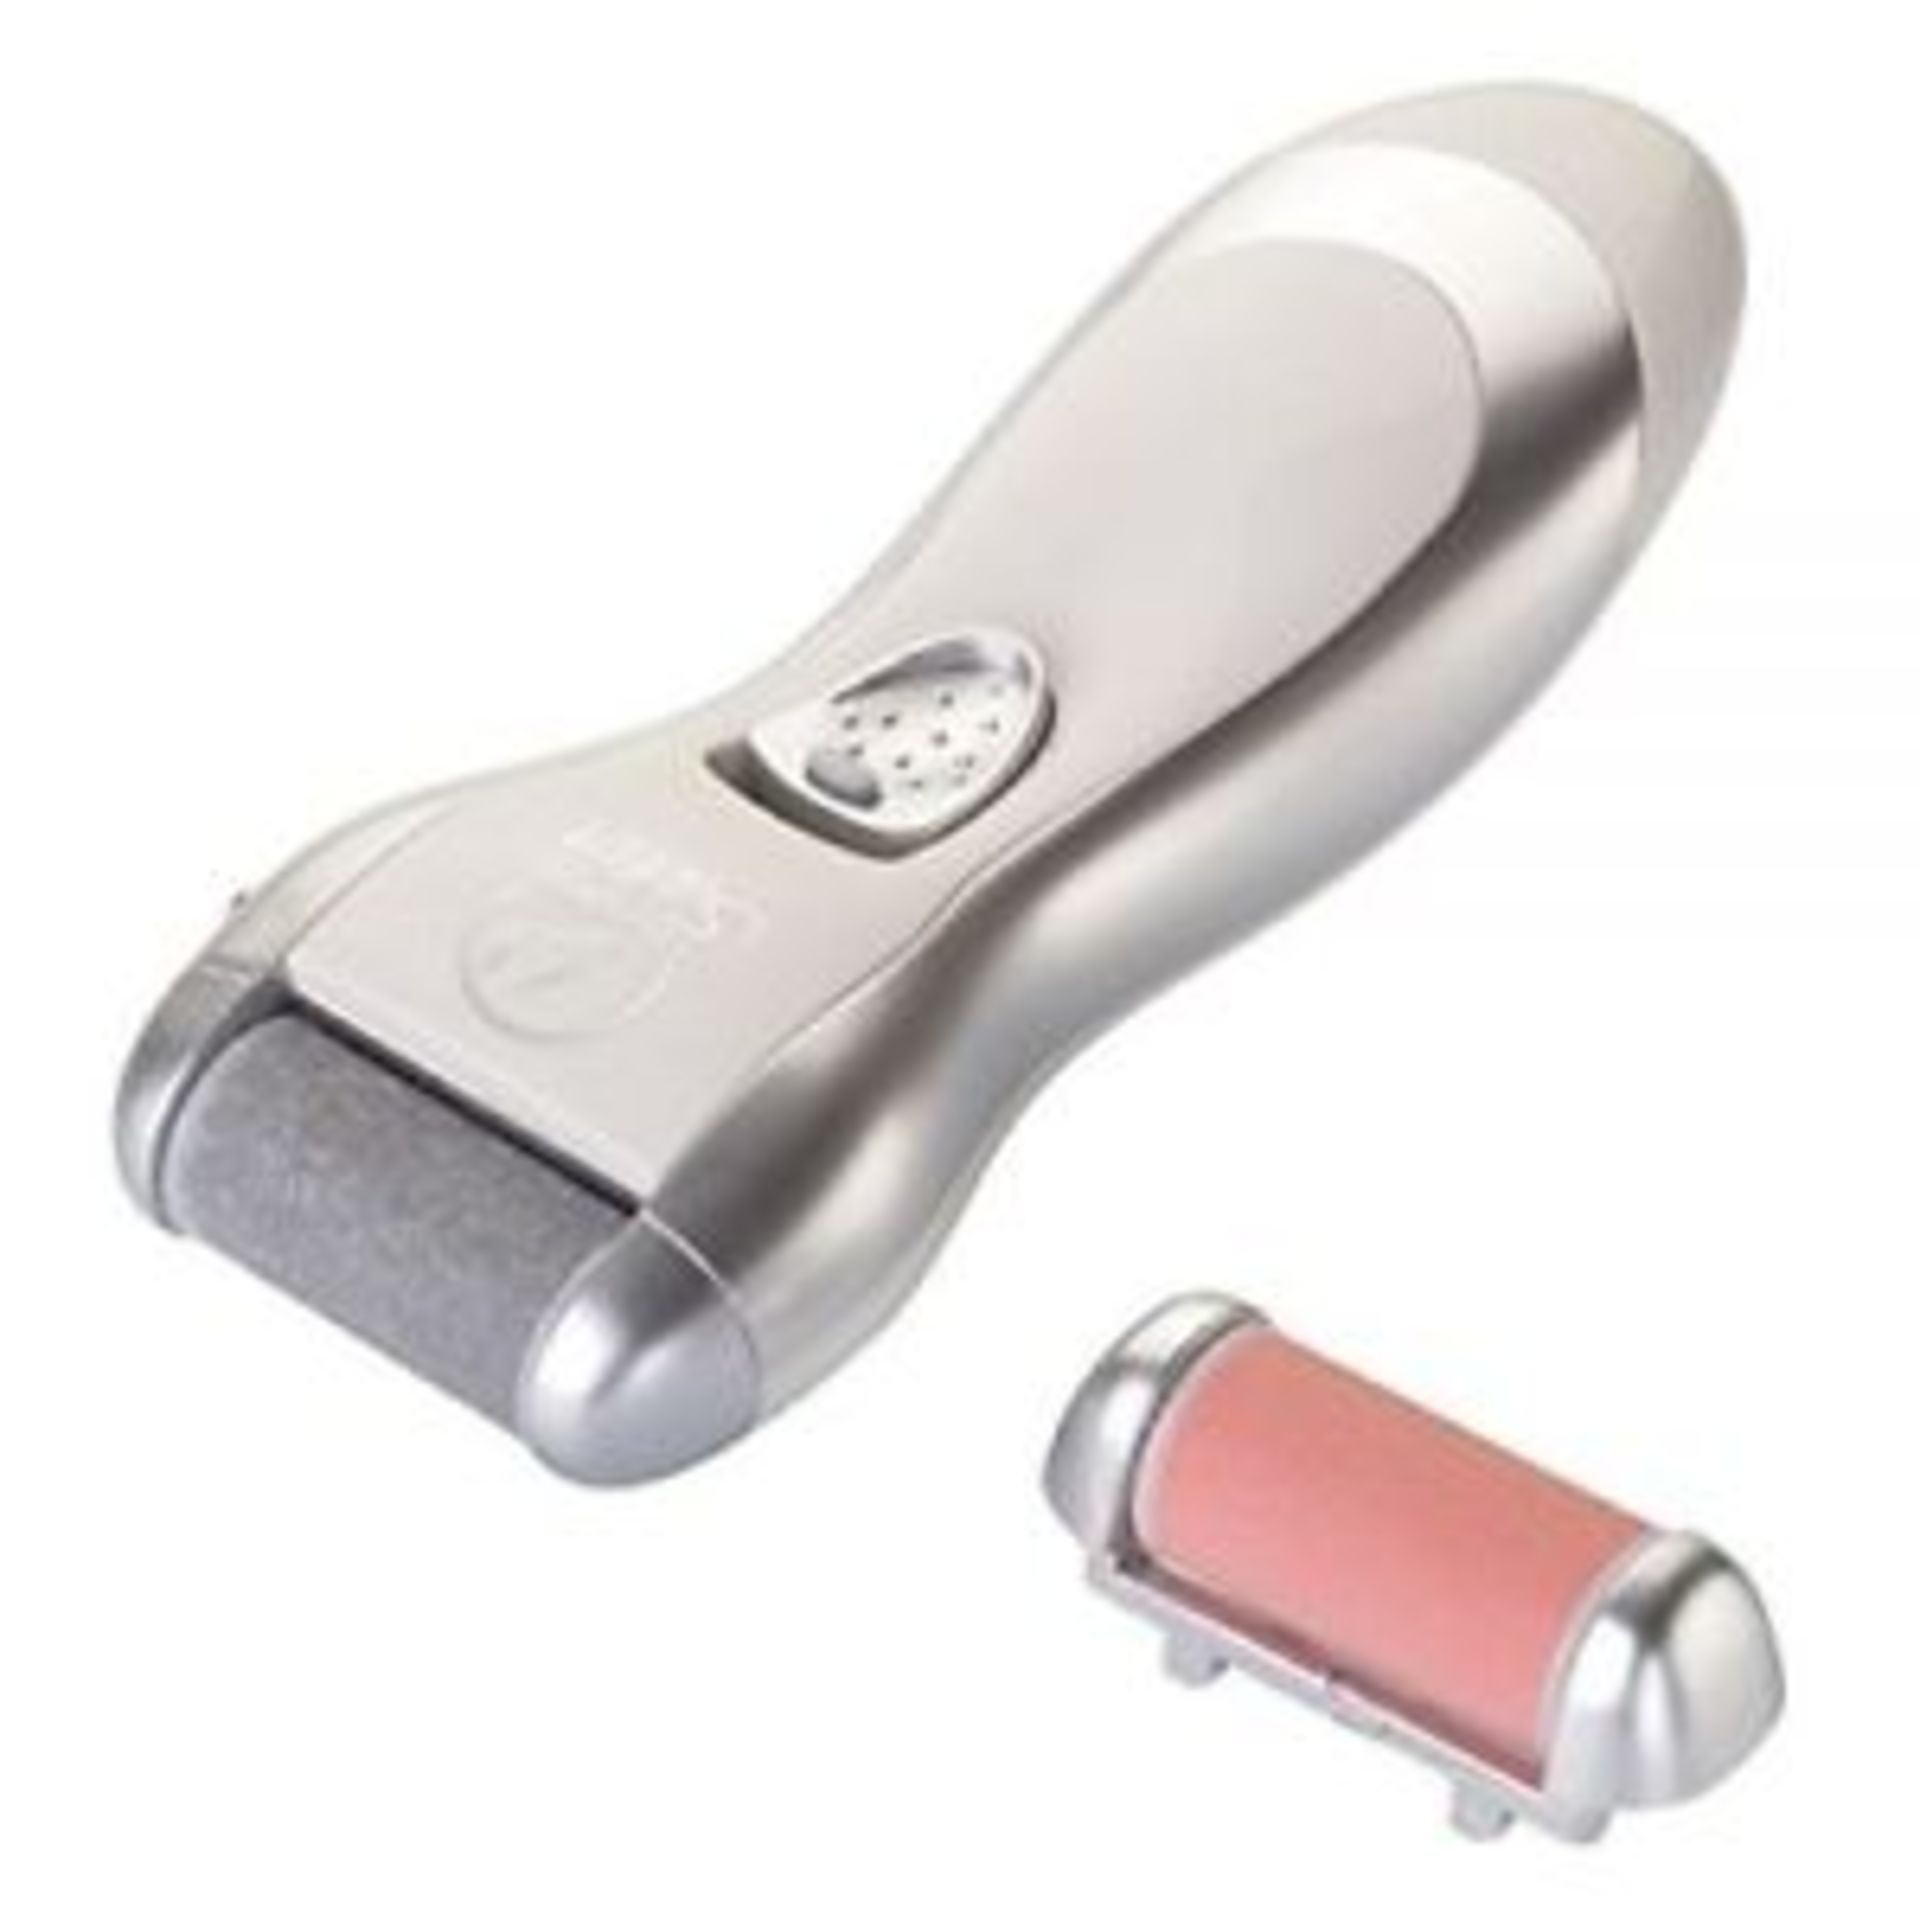 V Brand New Velform Satin Battery Operated Foot File Callous/Rough Skin Remover-Rotates At 2500rpm- - Image 2 of 3